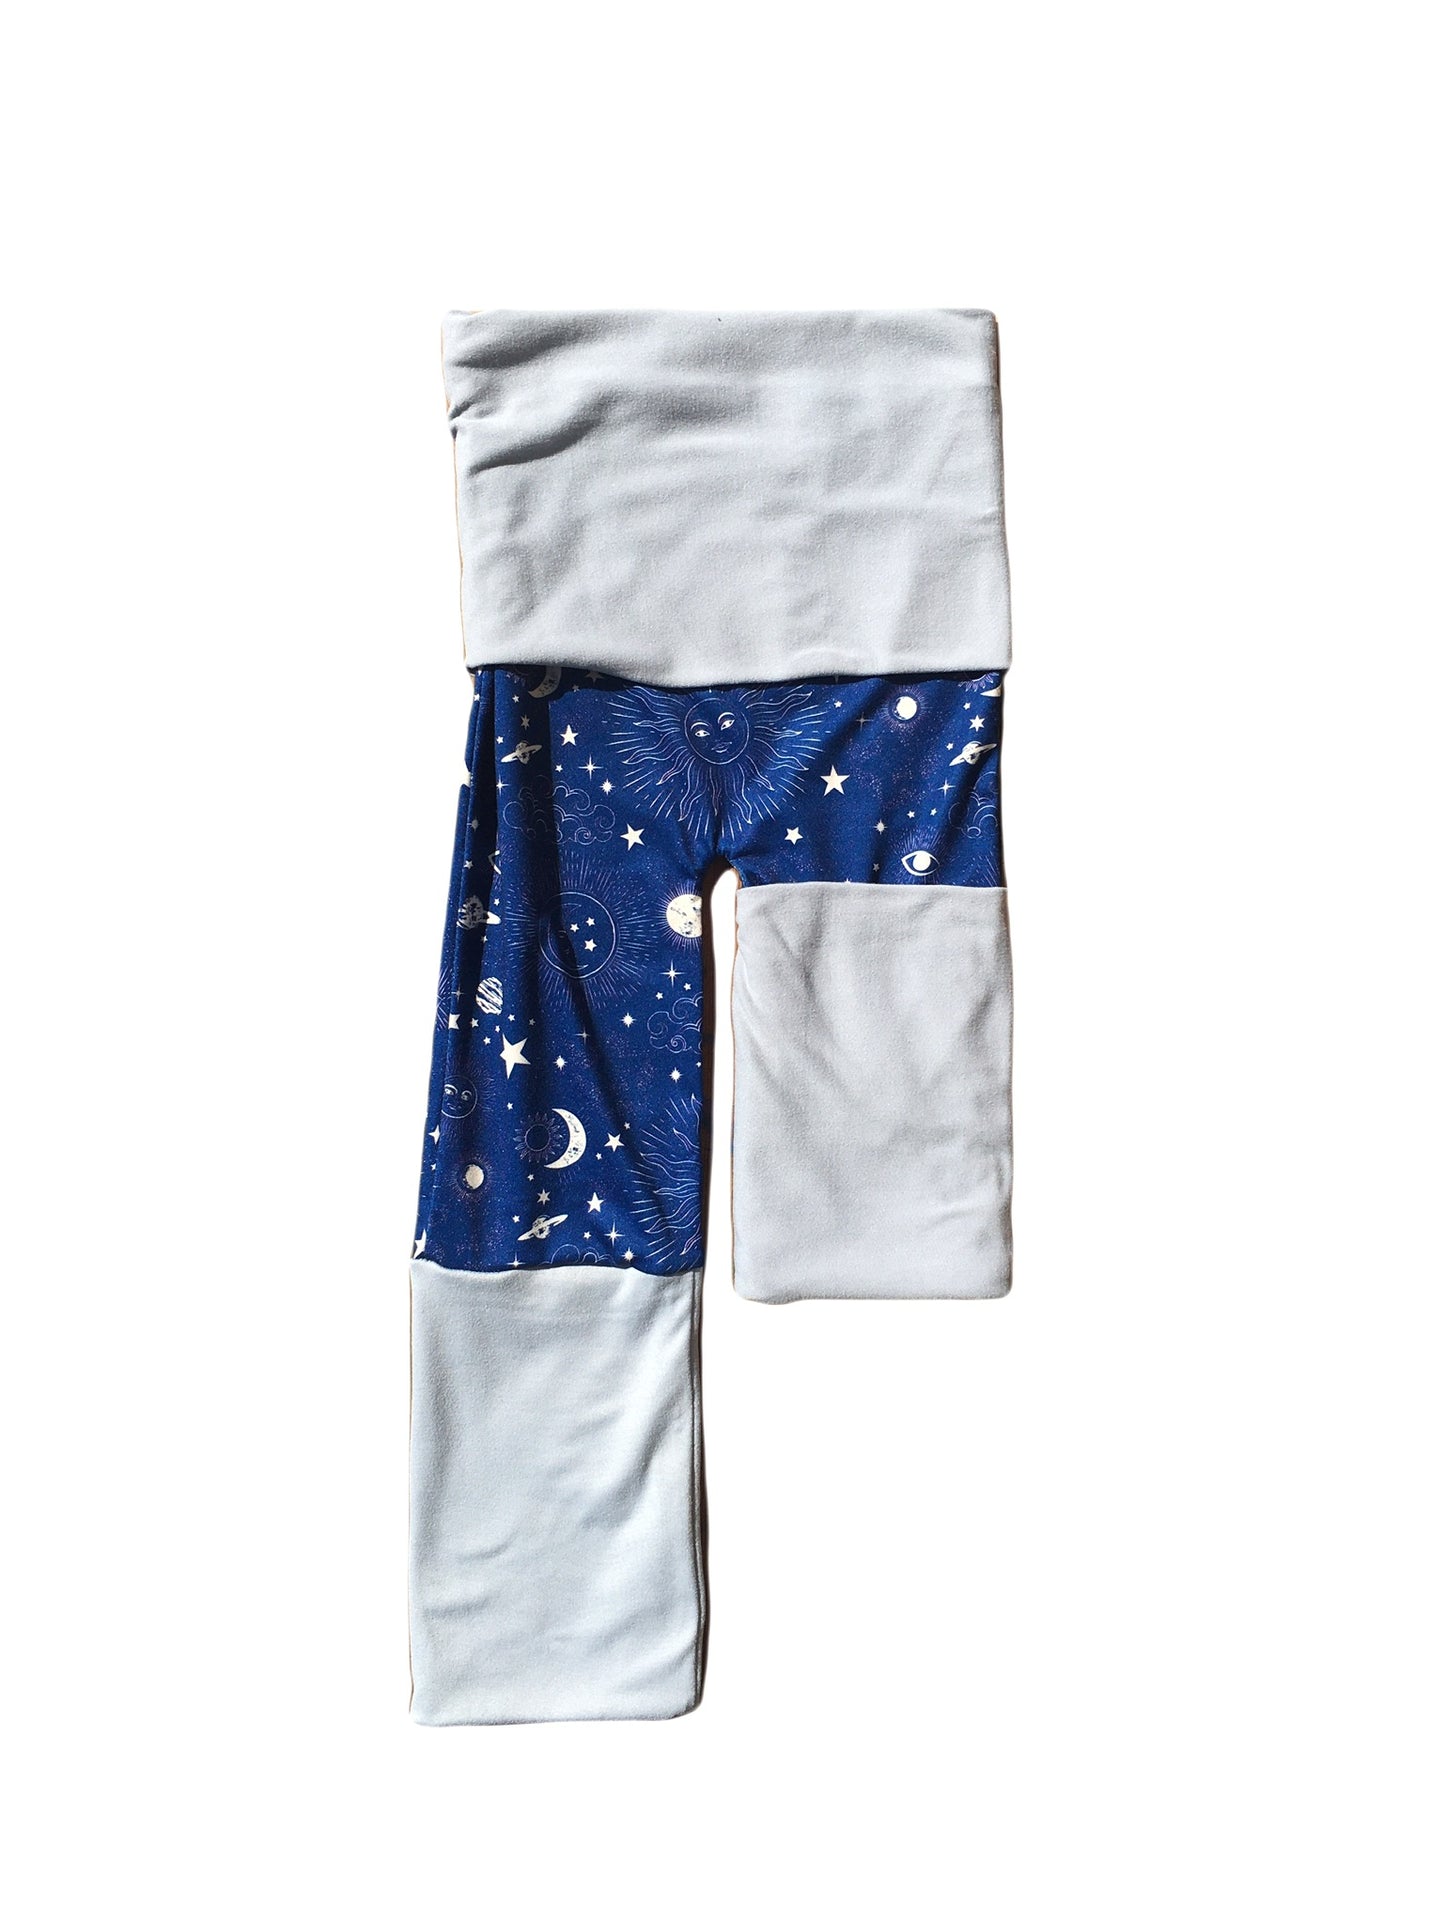 Adjustable Pants - Celestial with Light Blue